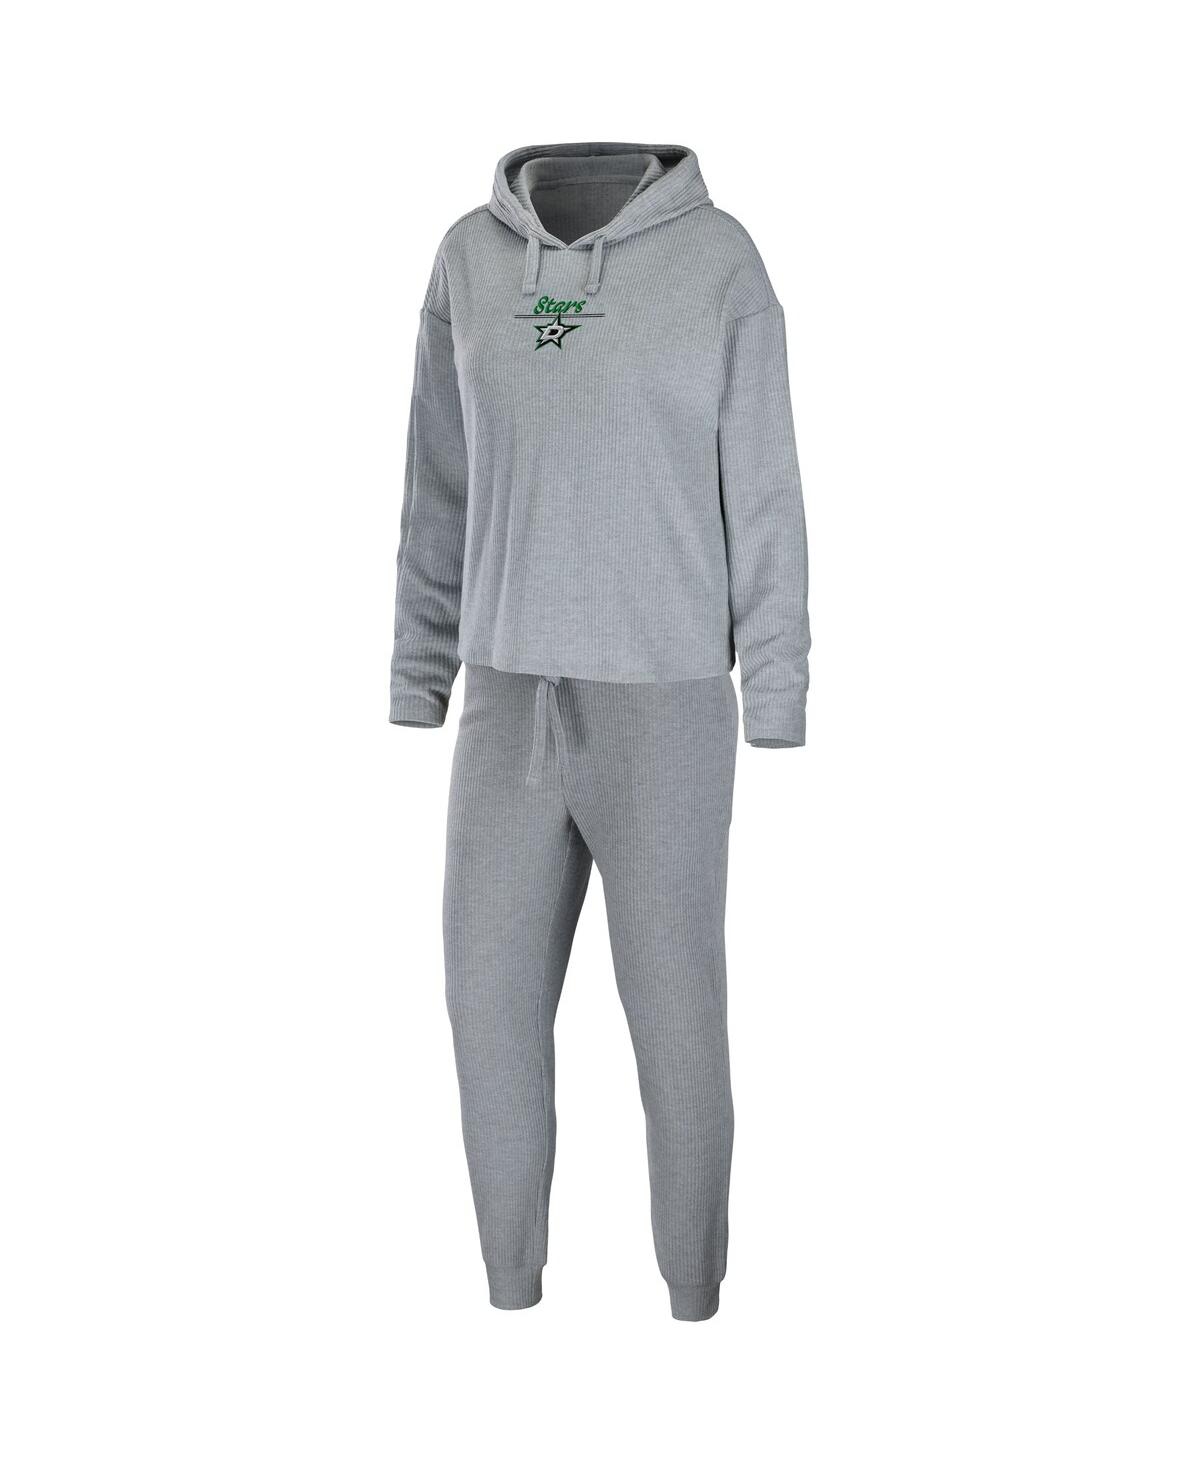 Shop Wear By Erin Andrews Women's  Heather Gray Dallas Stars Logo Pullover Hoodie And Pants Sleep Set